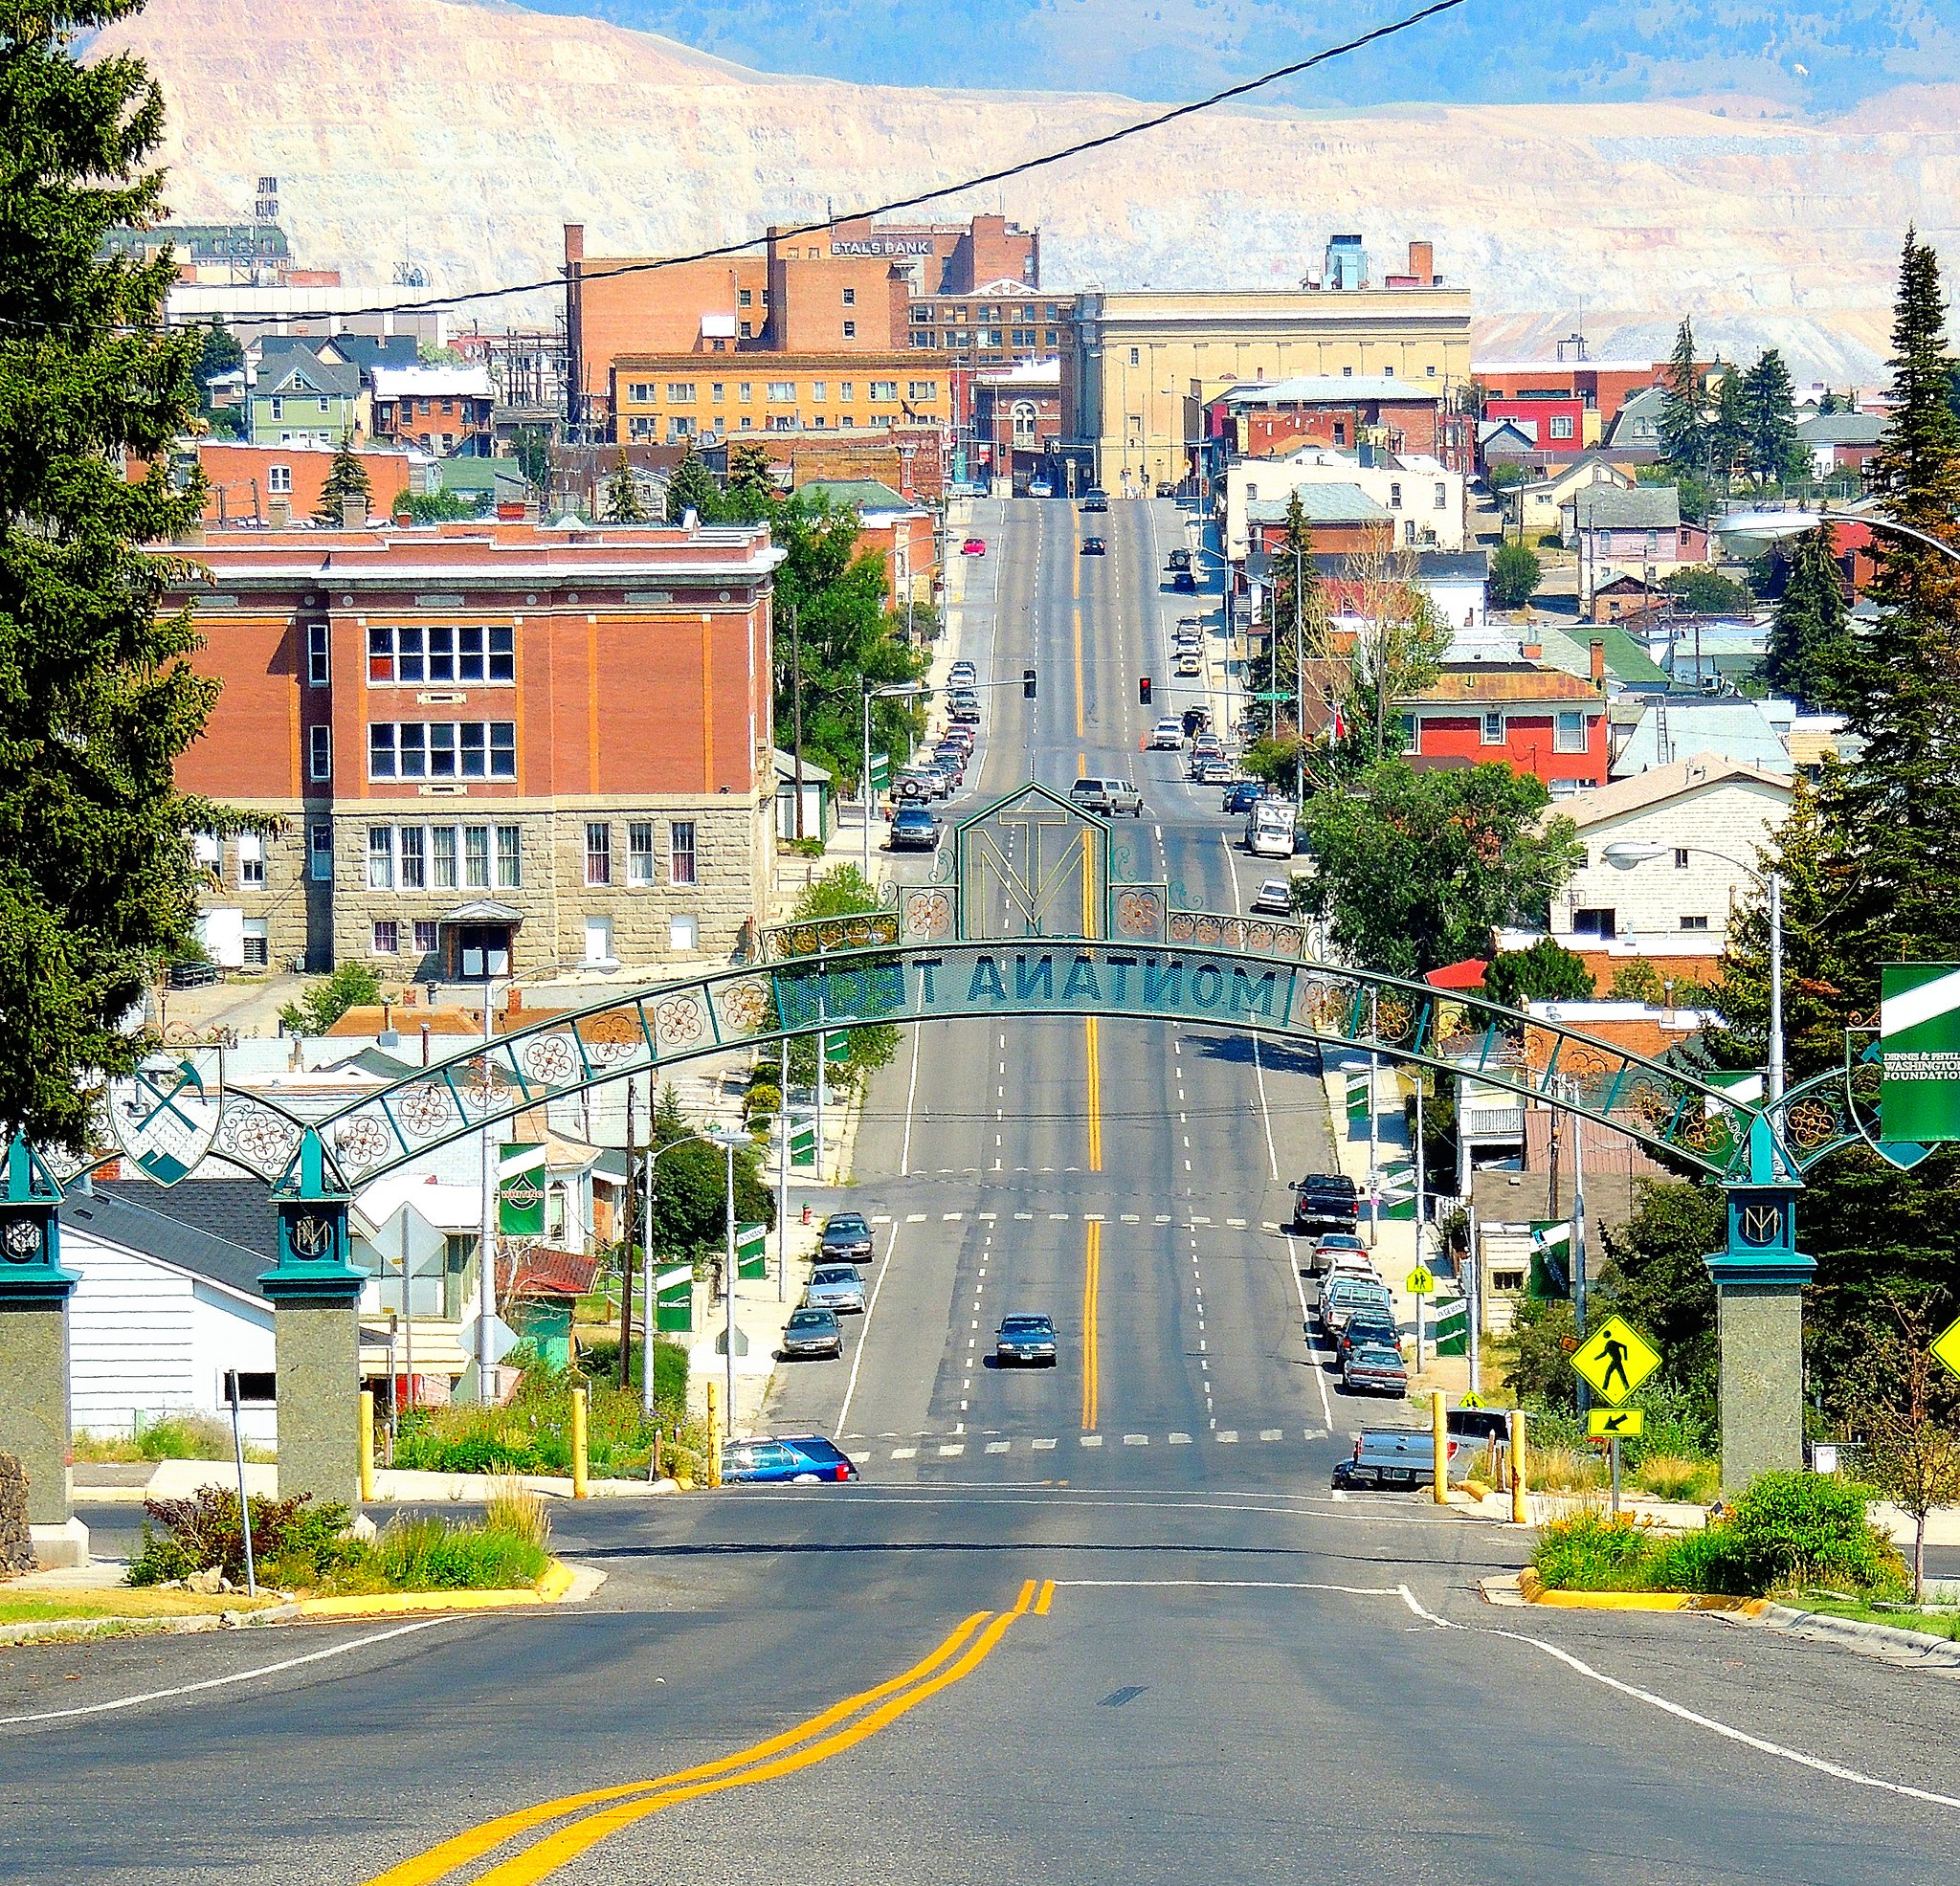 35 fantastic photos of Butte in Montana, US BOOMSbeat